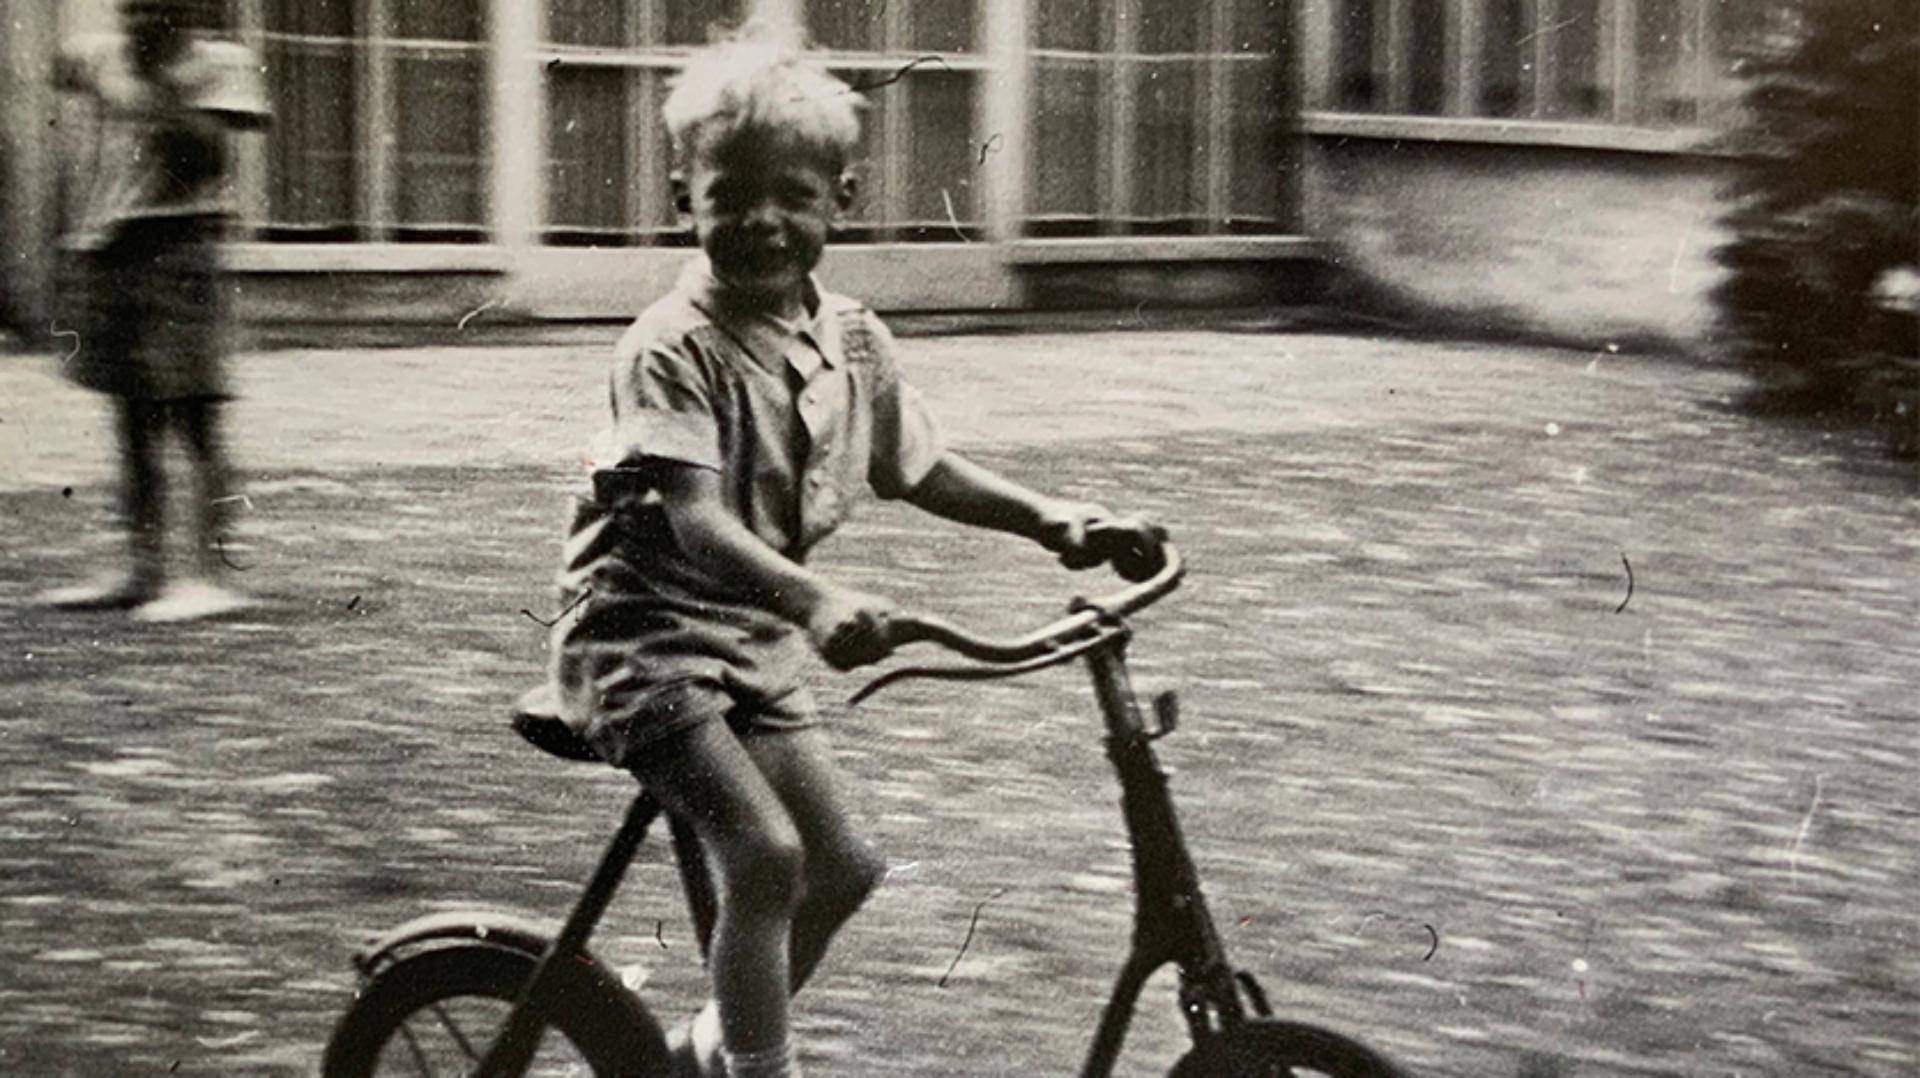 Young James Dyson cycling a small Triang bike